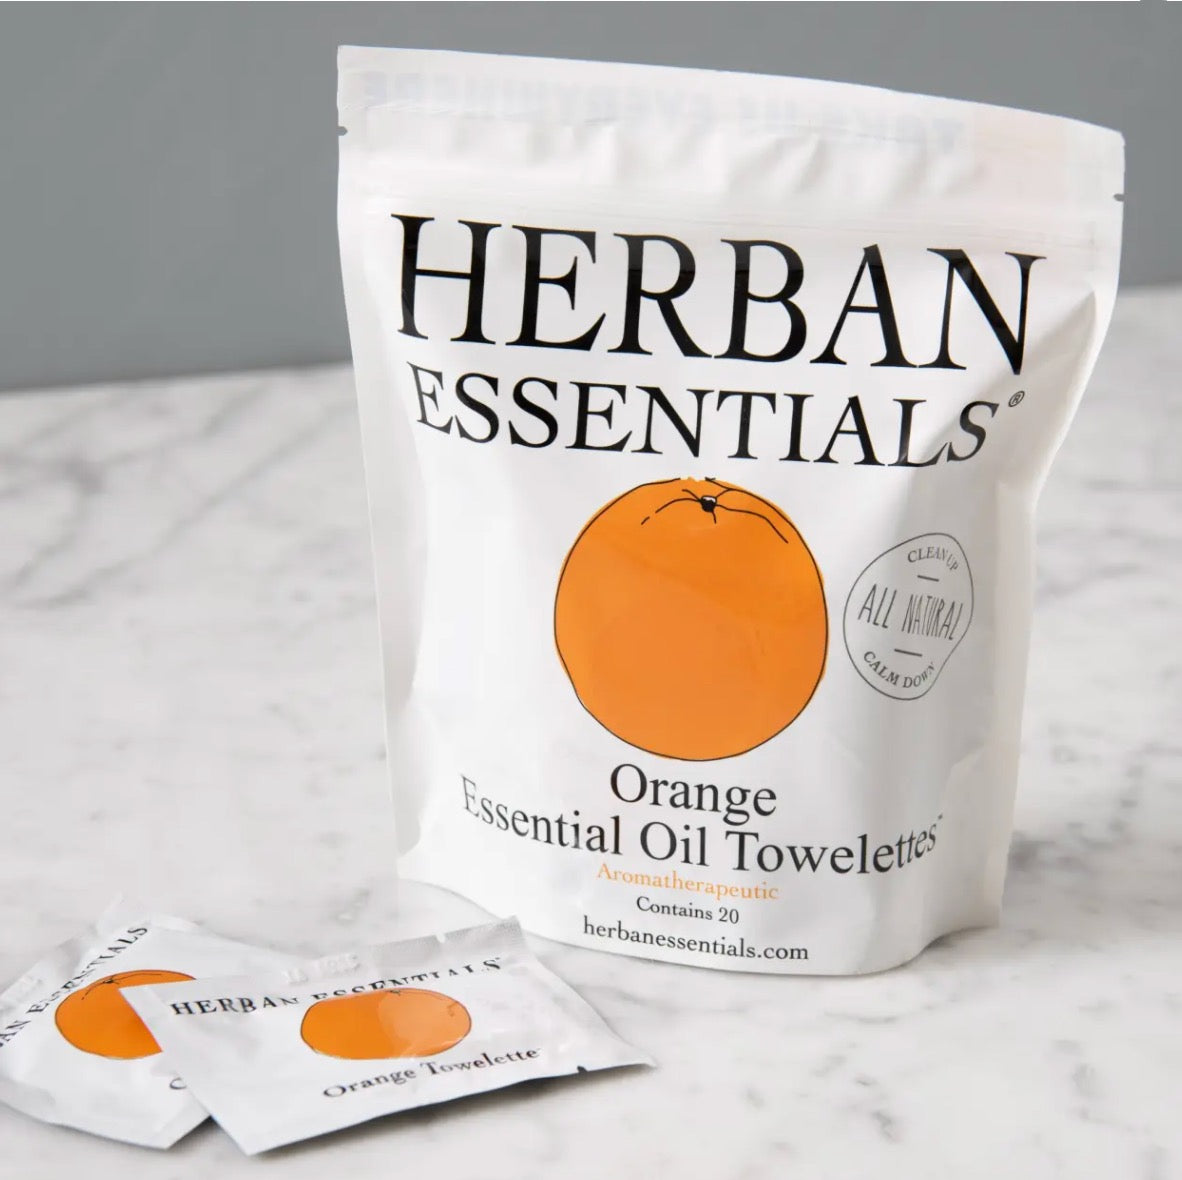 Pack of 20 Orange Essential Oil Towelettes by Herban Essentials